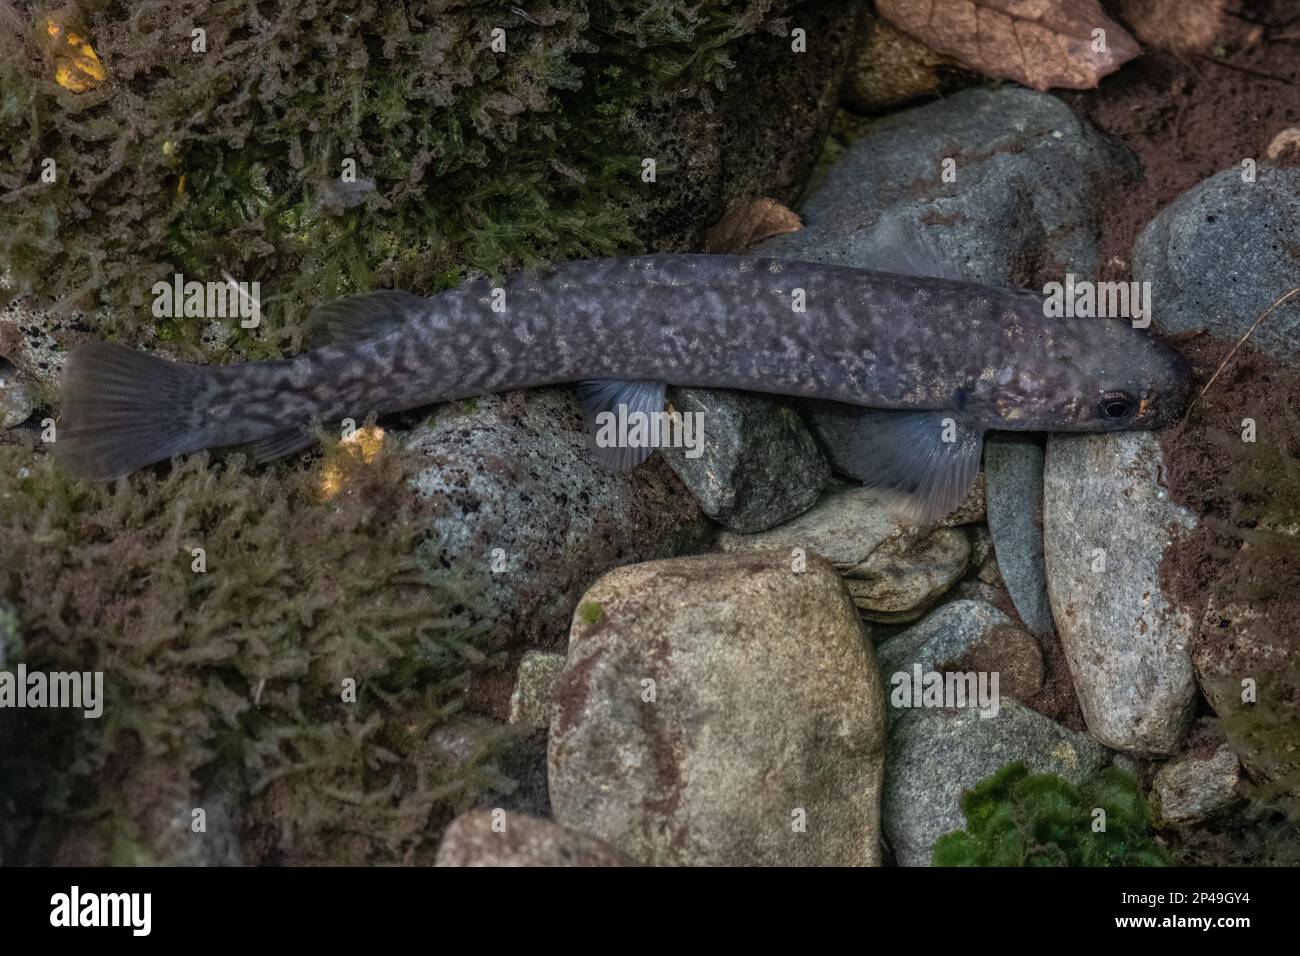 climbing galaxias or koaro (Galaxias brevipinnis) is a freshwater fish native to Aotearoa New Zealand, seen in a forest stream in the South Island. Stock Photo